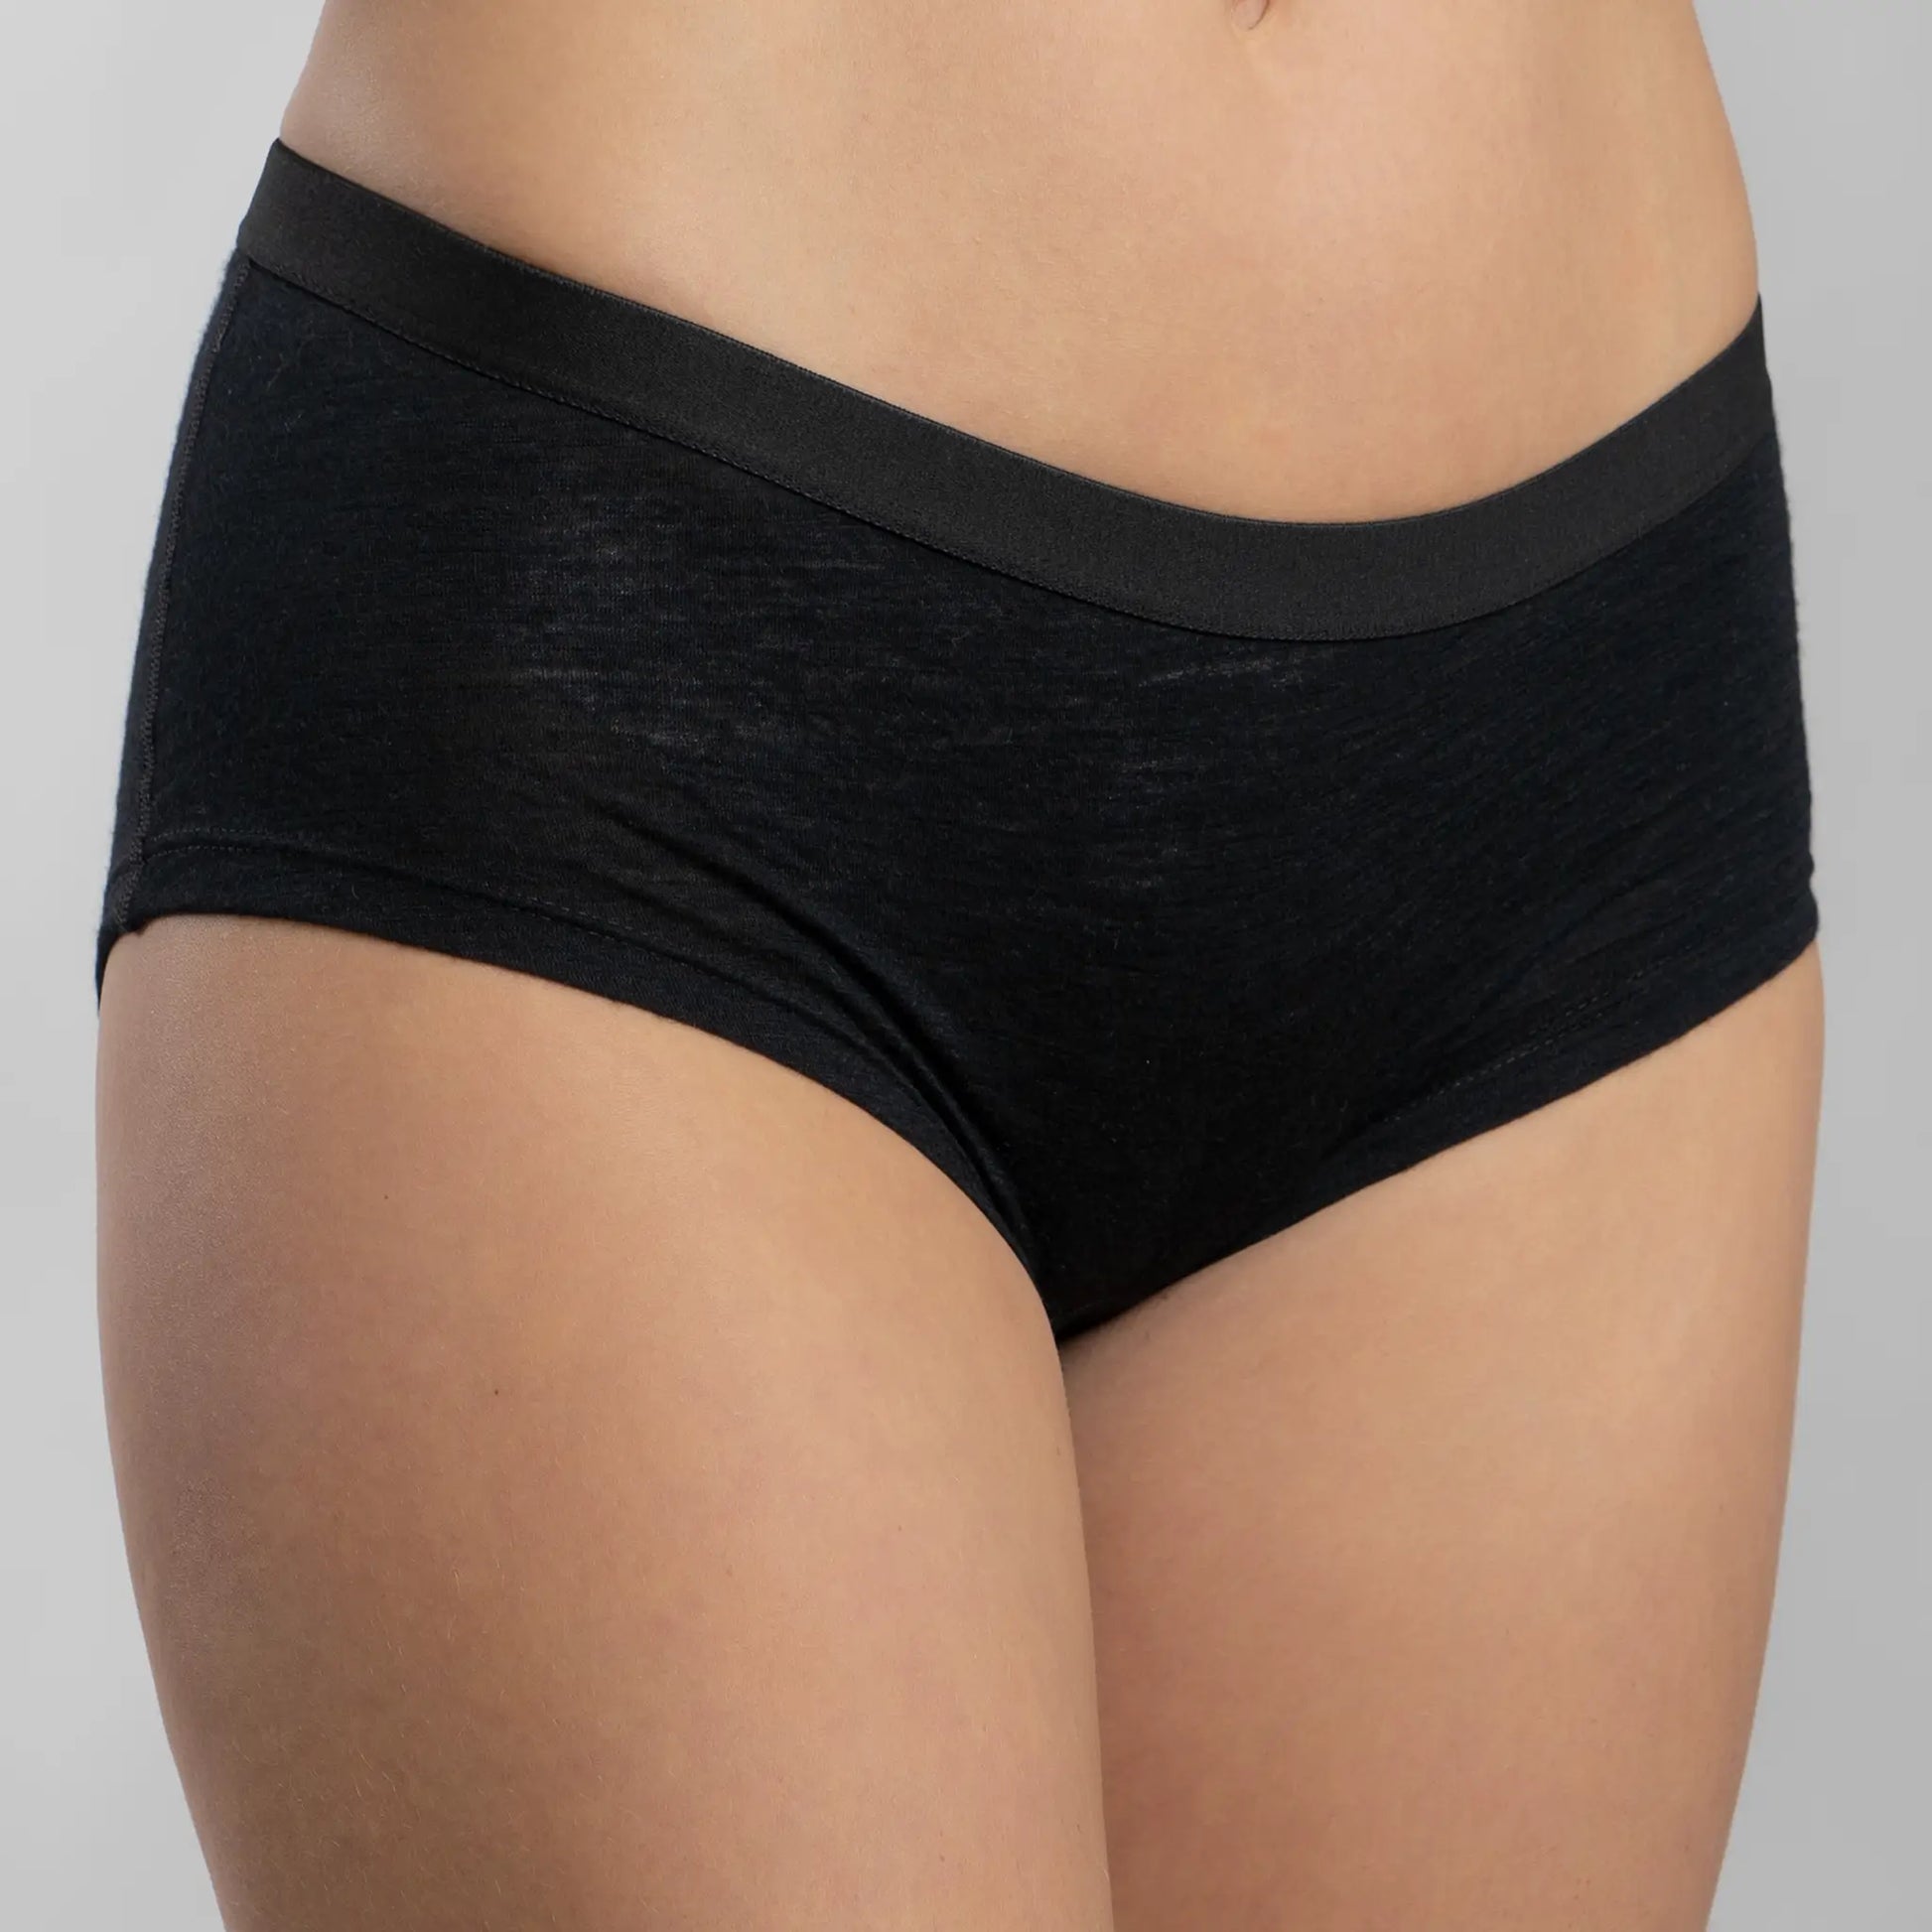 Buy Kearo Women Antibacterial Modal Panty, Sweat-Absorbent, Stretchable  and Odour Free, Black, Pack of 1